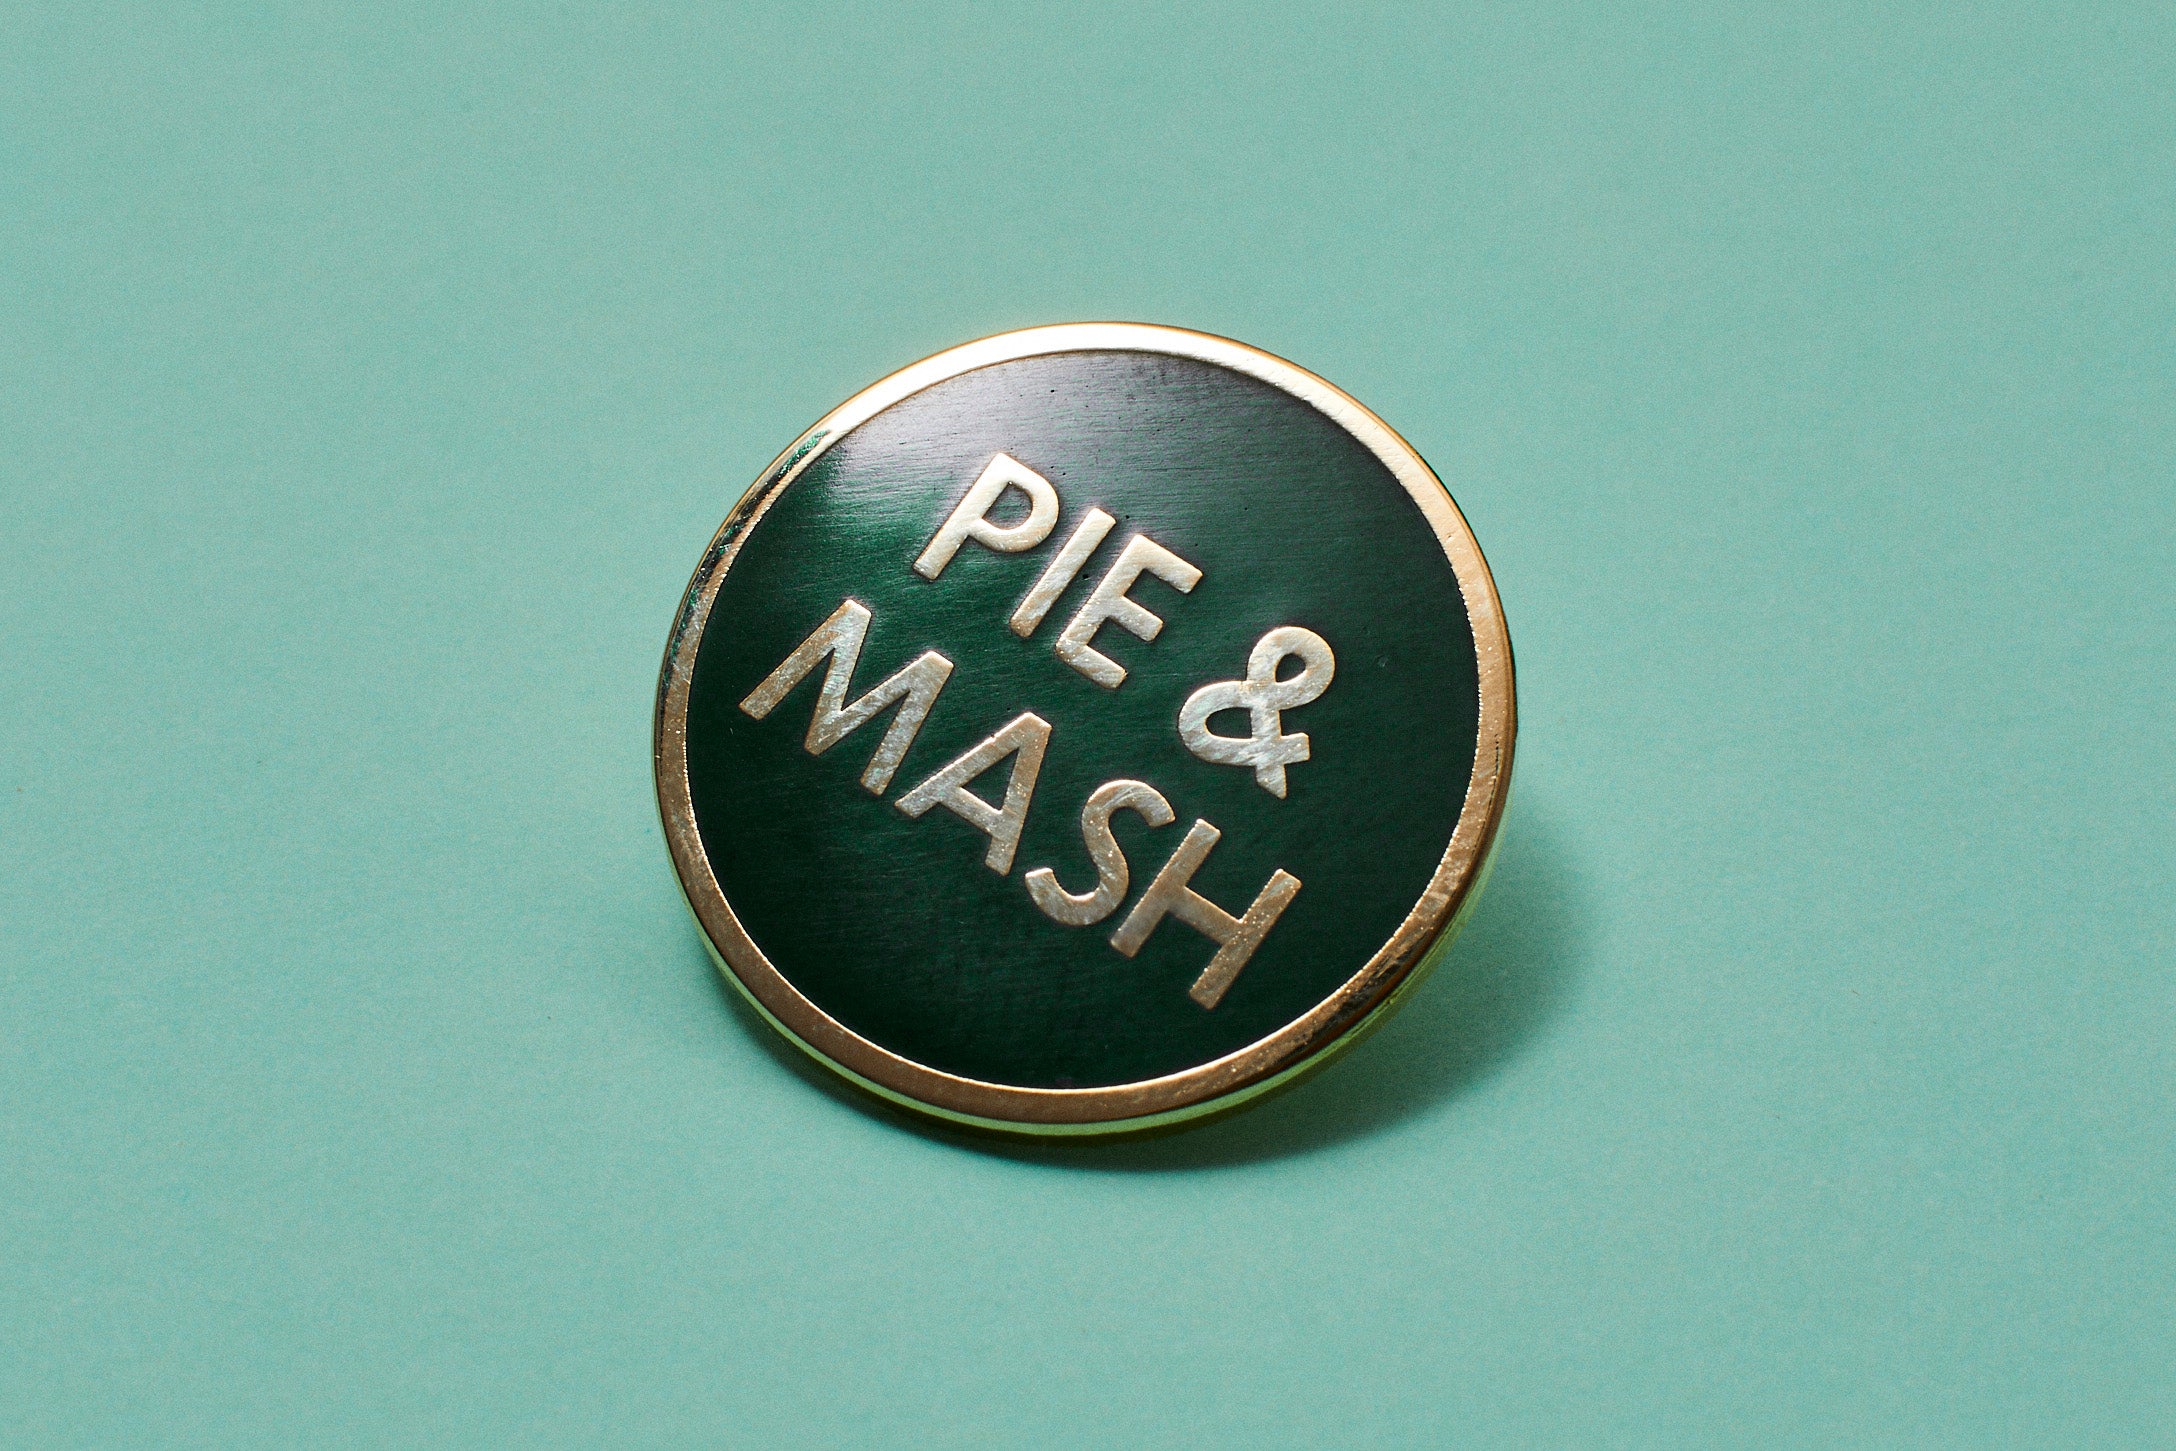 Pie & Mash London - Signed Book and Badge Offer